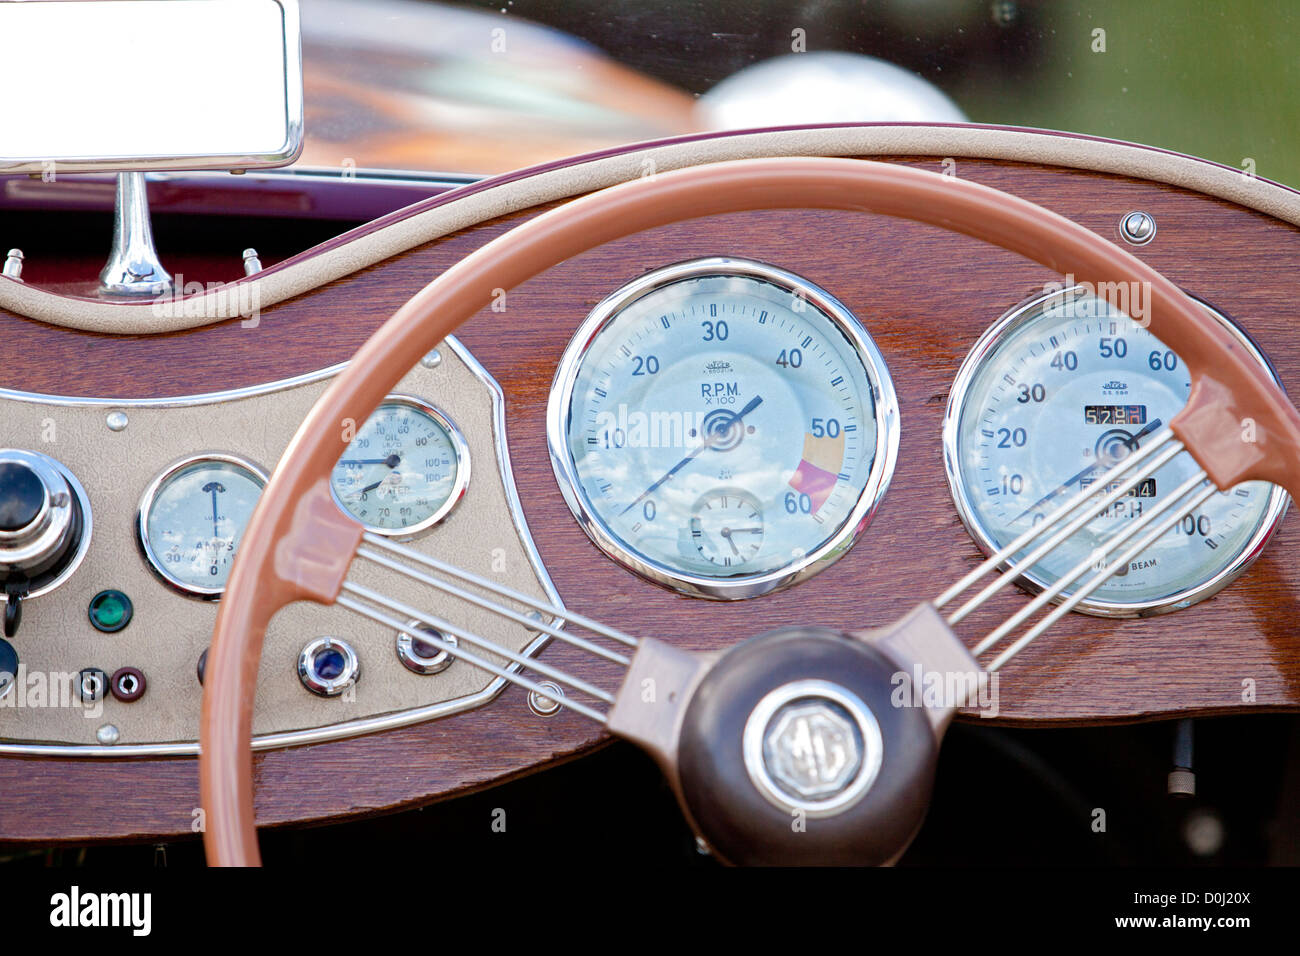 A close up view of the steering wheel and dashboard of a classic car at Goodwood revival. Stock Photo